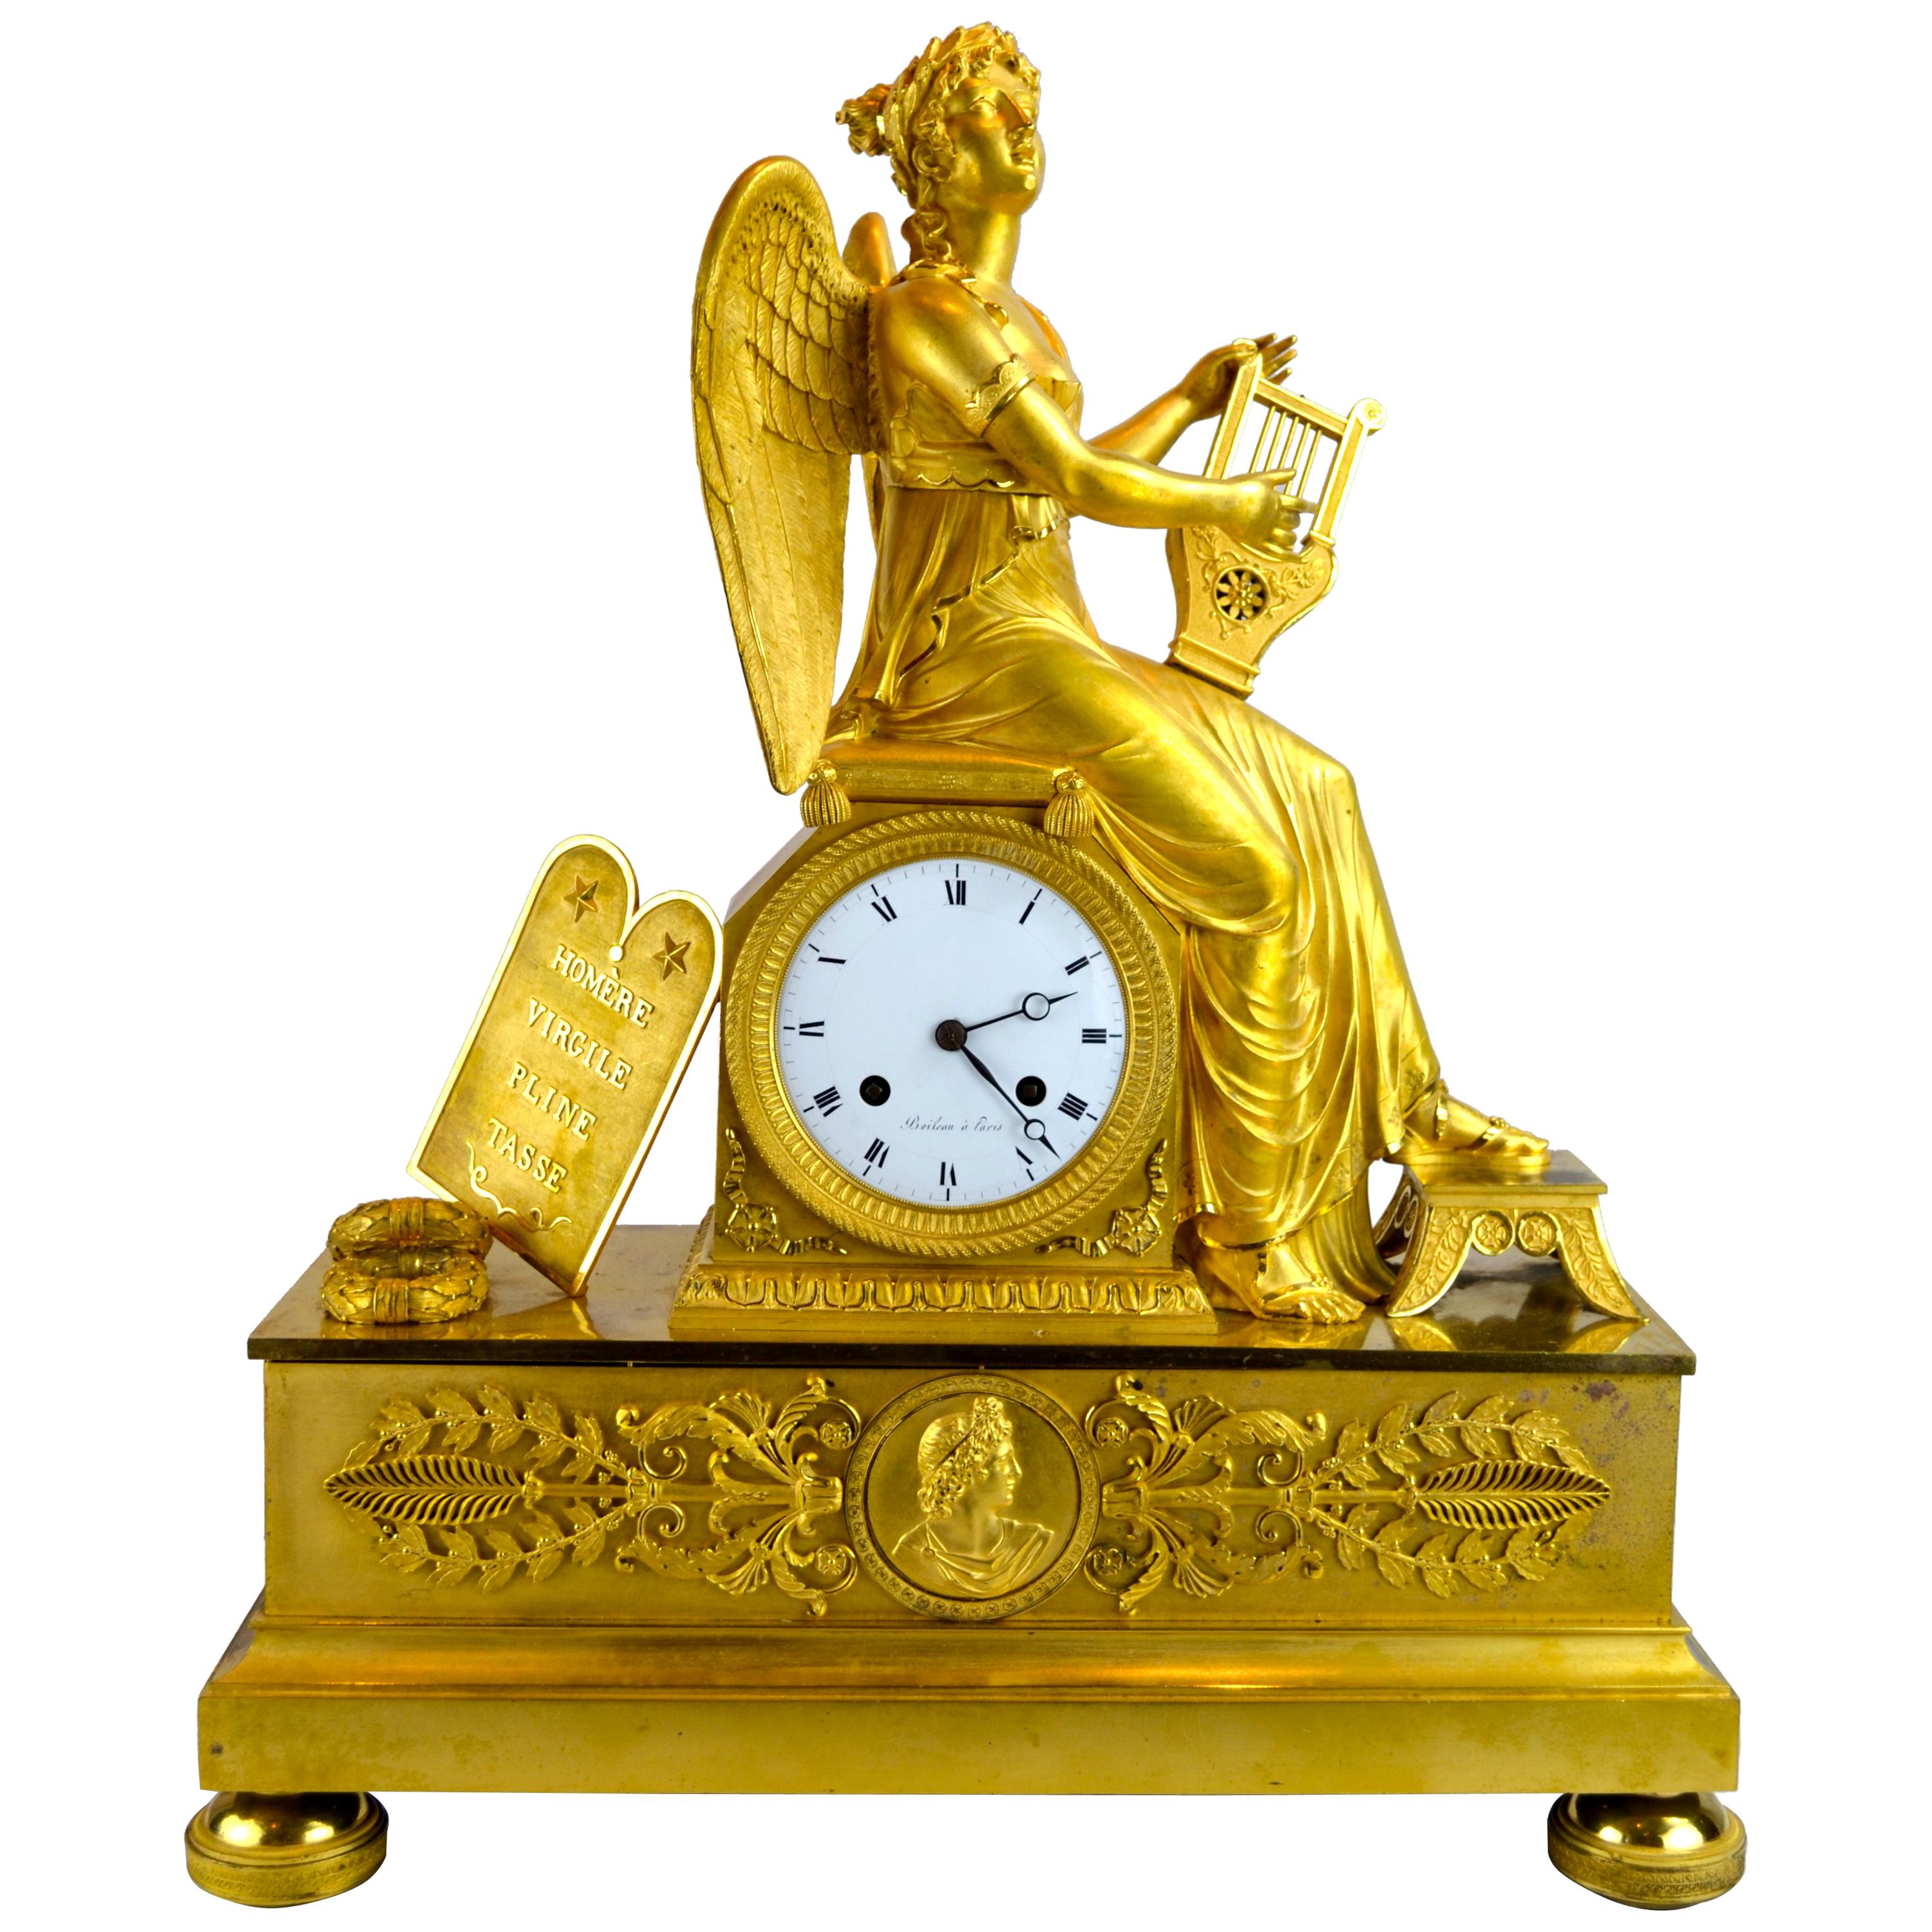 Empire Clock Depicting Clio the Muse of History and Music